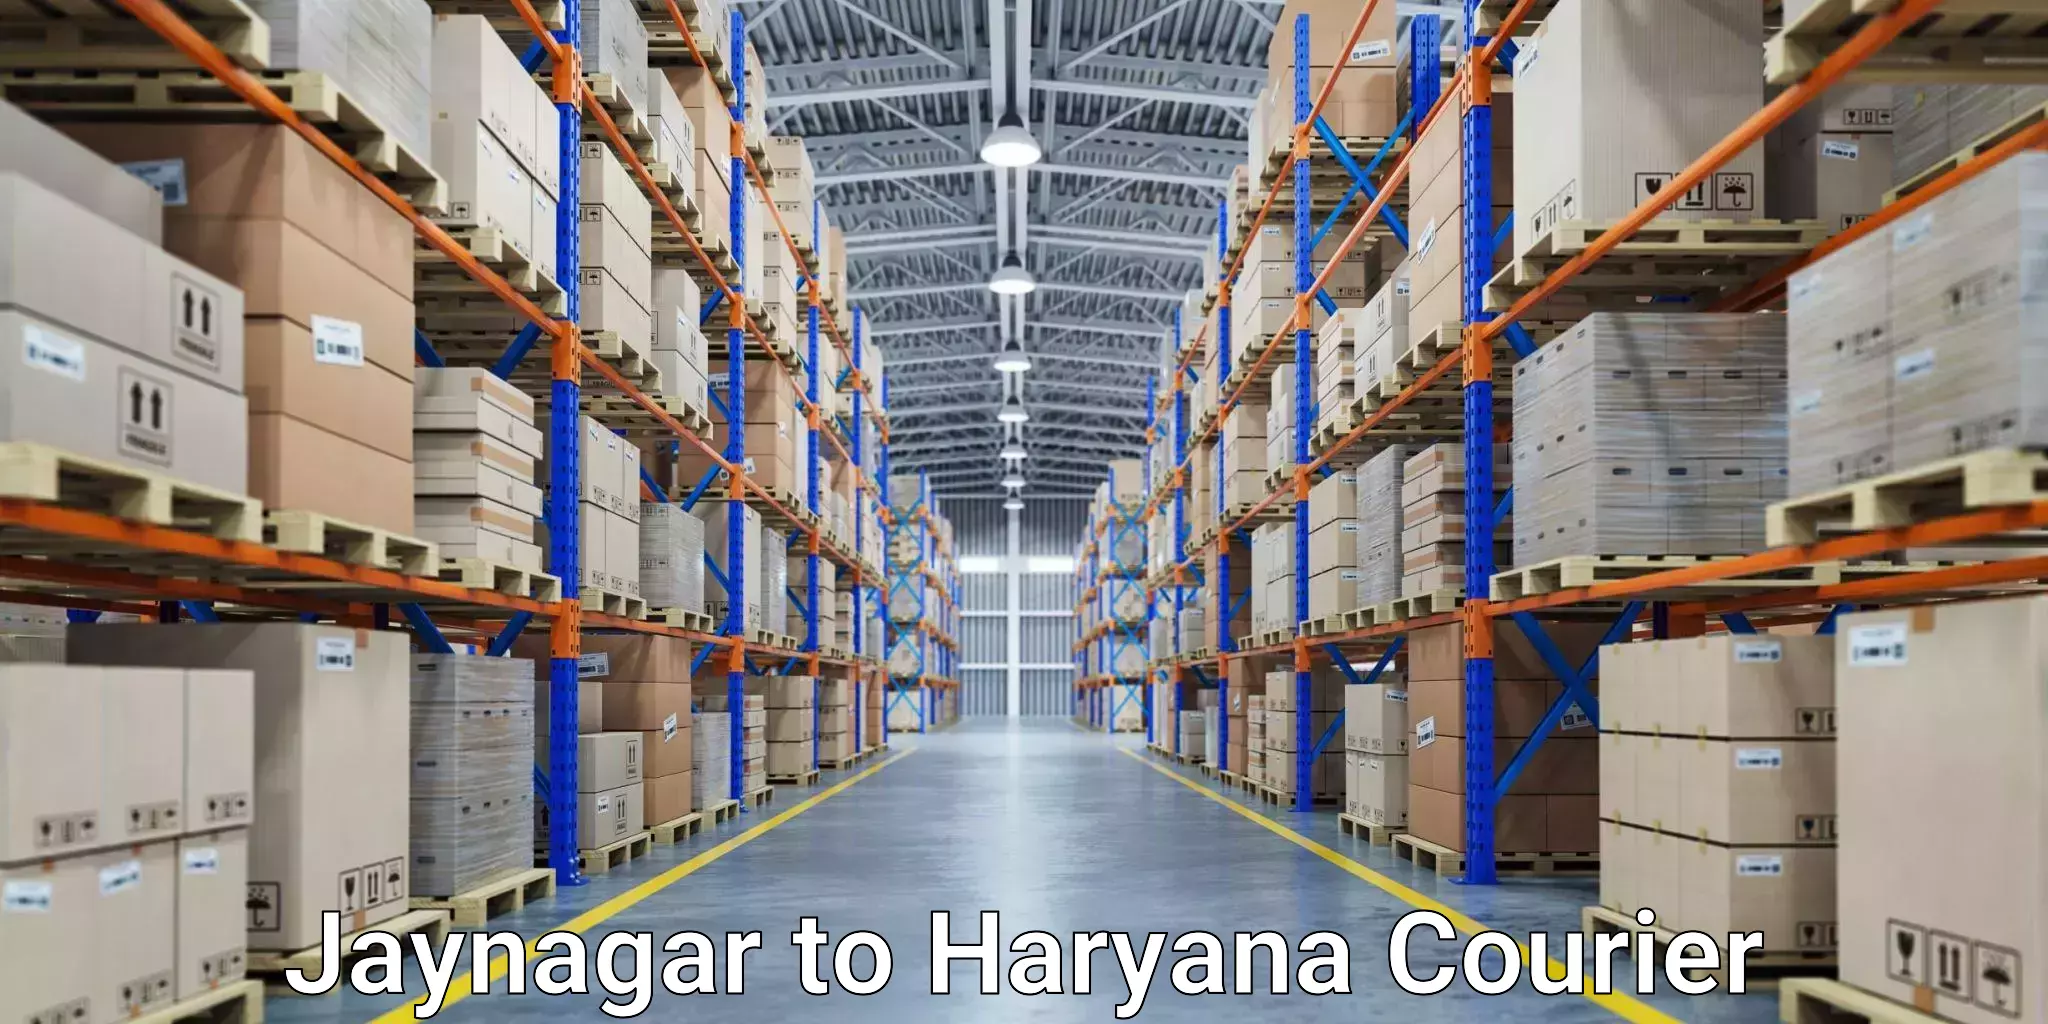 Express delivery capabilities Jaynagar to Pinjore